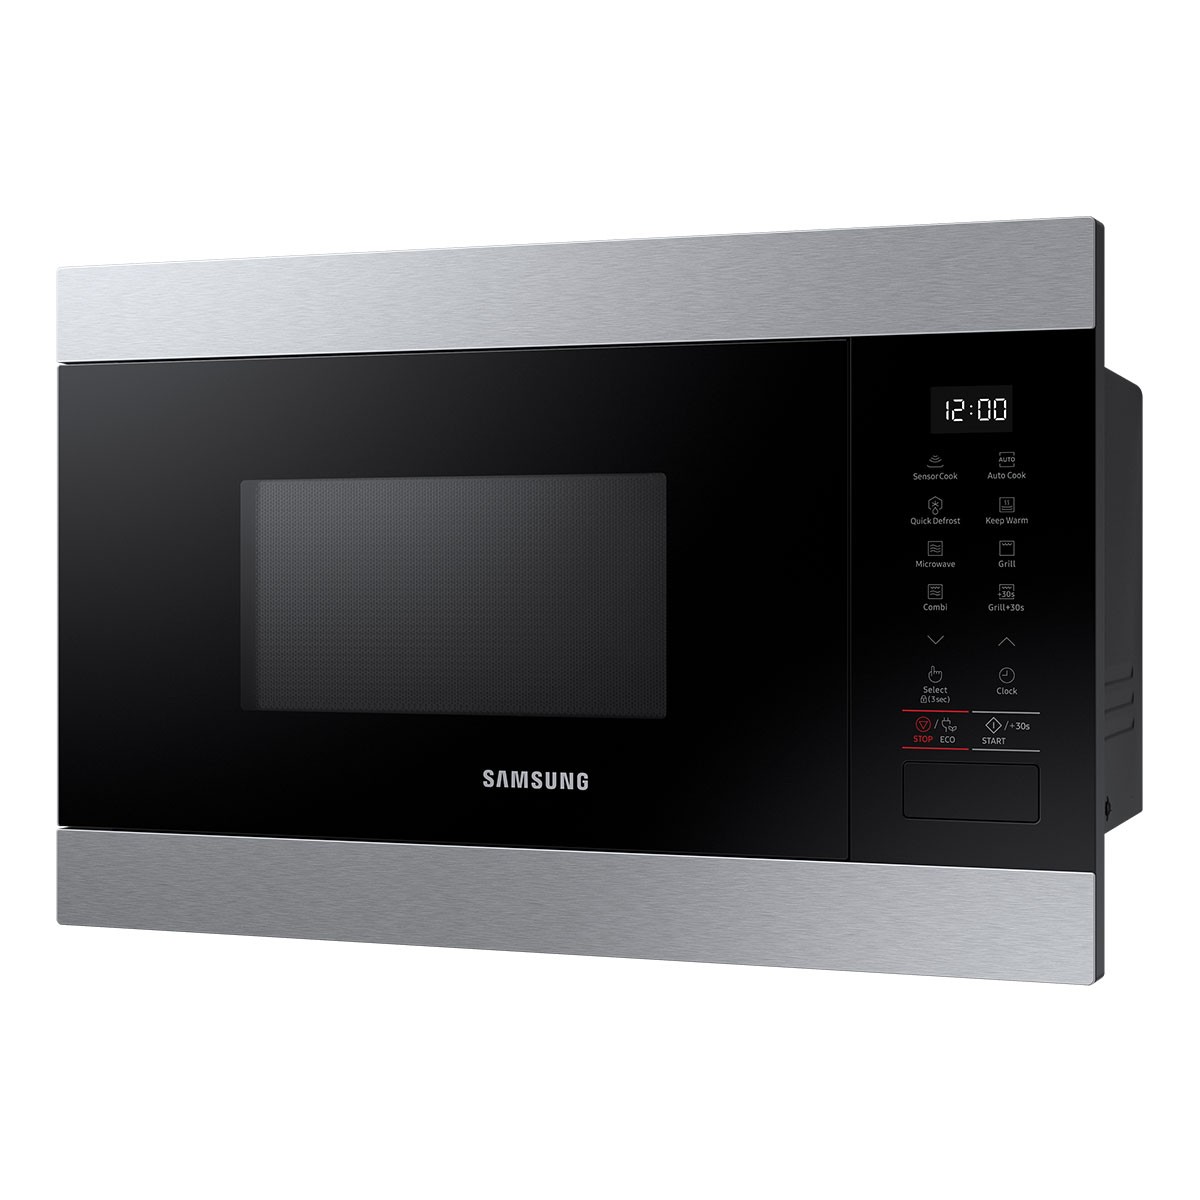 Samsung Built-in Microwave 850W 22L Stainless Steel (MG22M8274CT/E1)